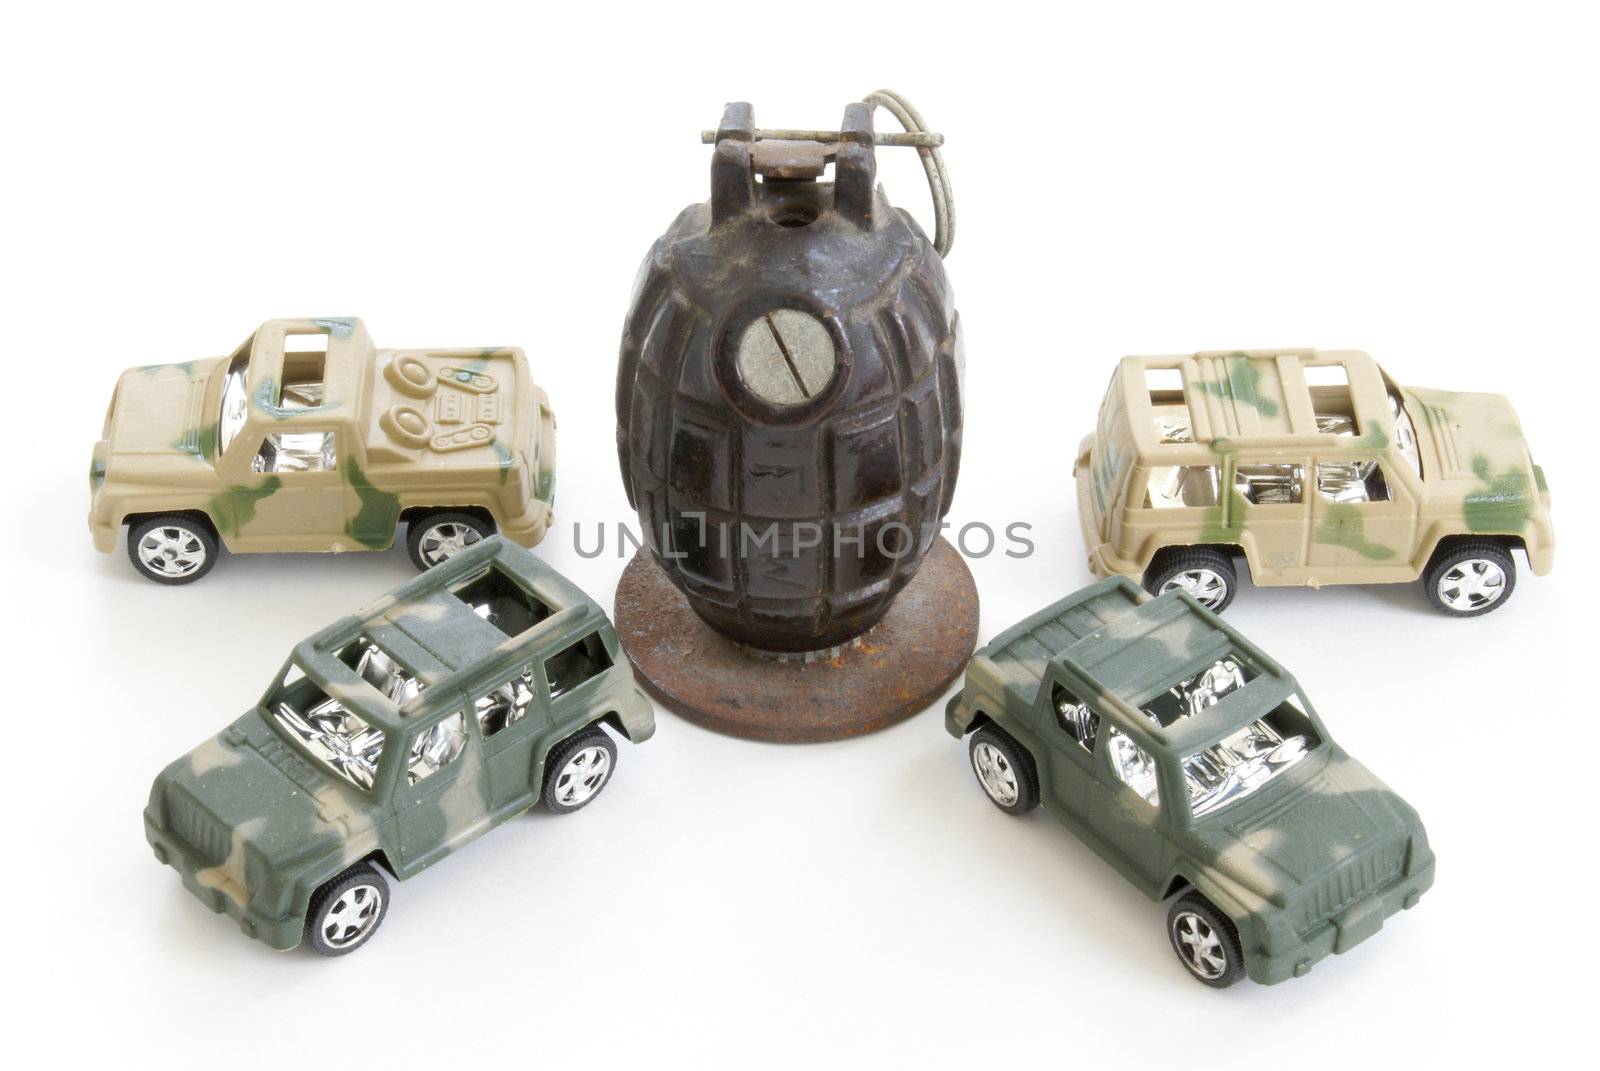 Four toy military vehicles surround a hand grenade.